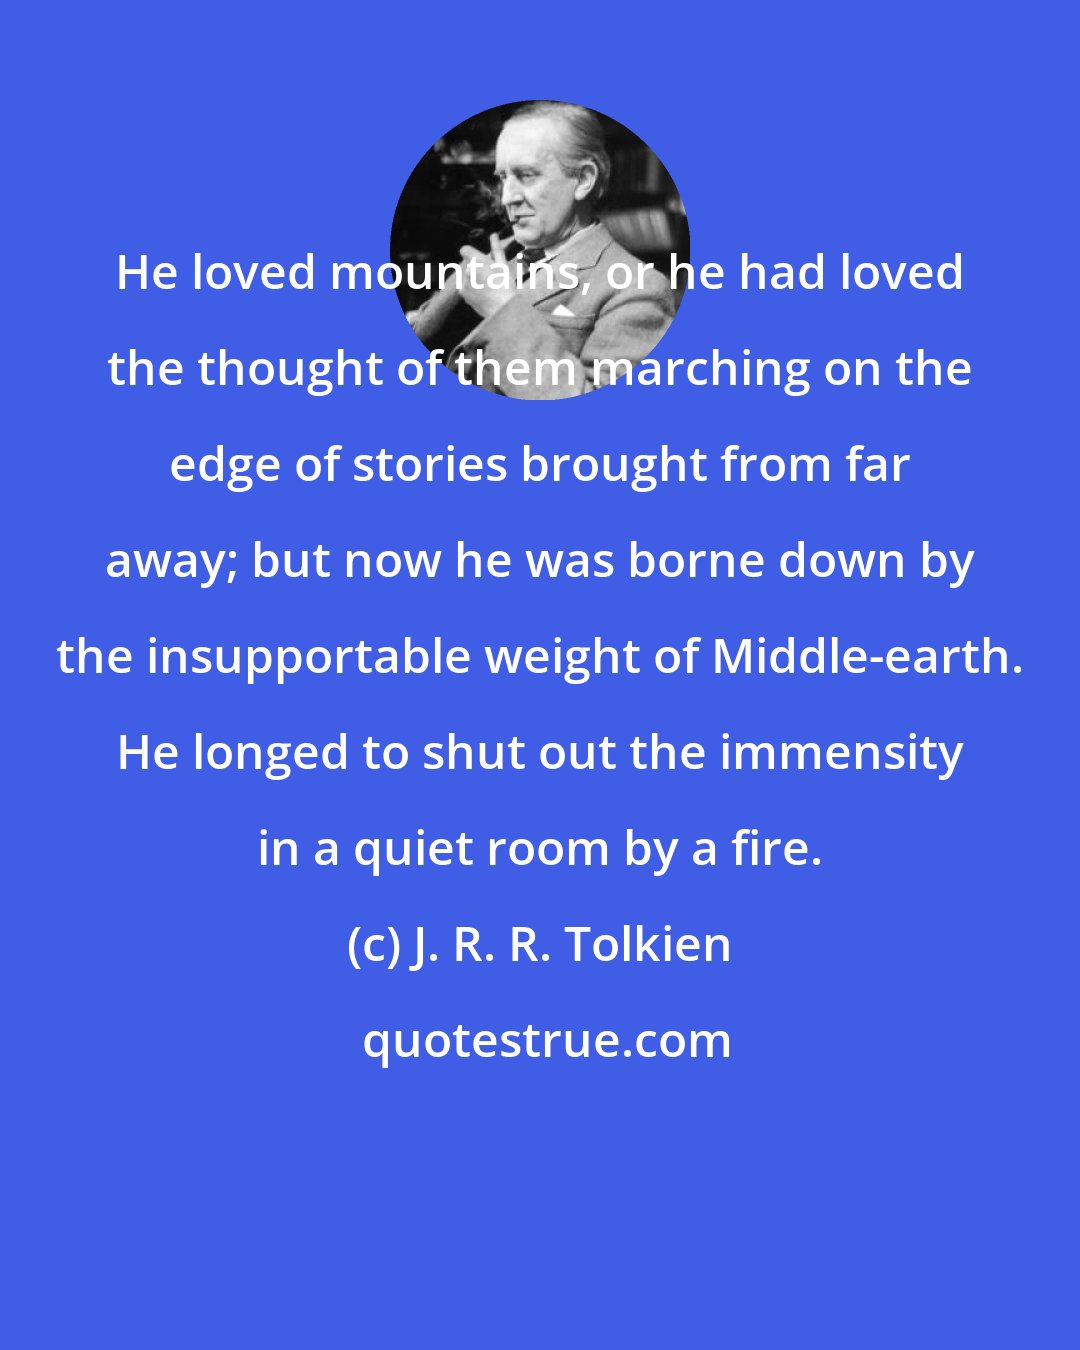 J. R. R. Tolkien: He loved mountains, or he had loved the thought of them marching on the edge of stories brought from far away; but now he was borne down by the insupportable weight of Middle-earth. He longed to shut out the immensity in a quiet room by a fire.